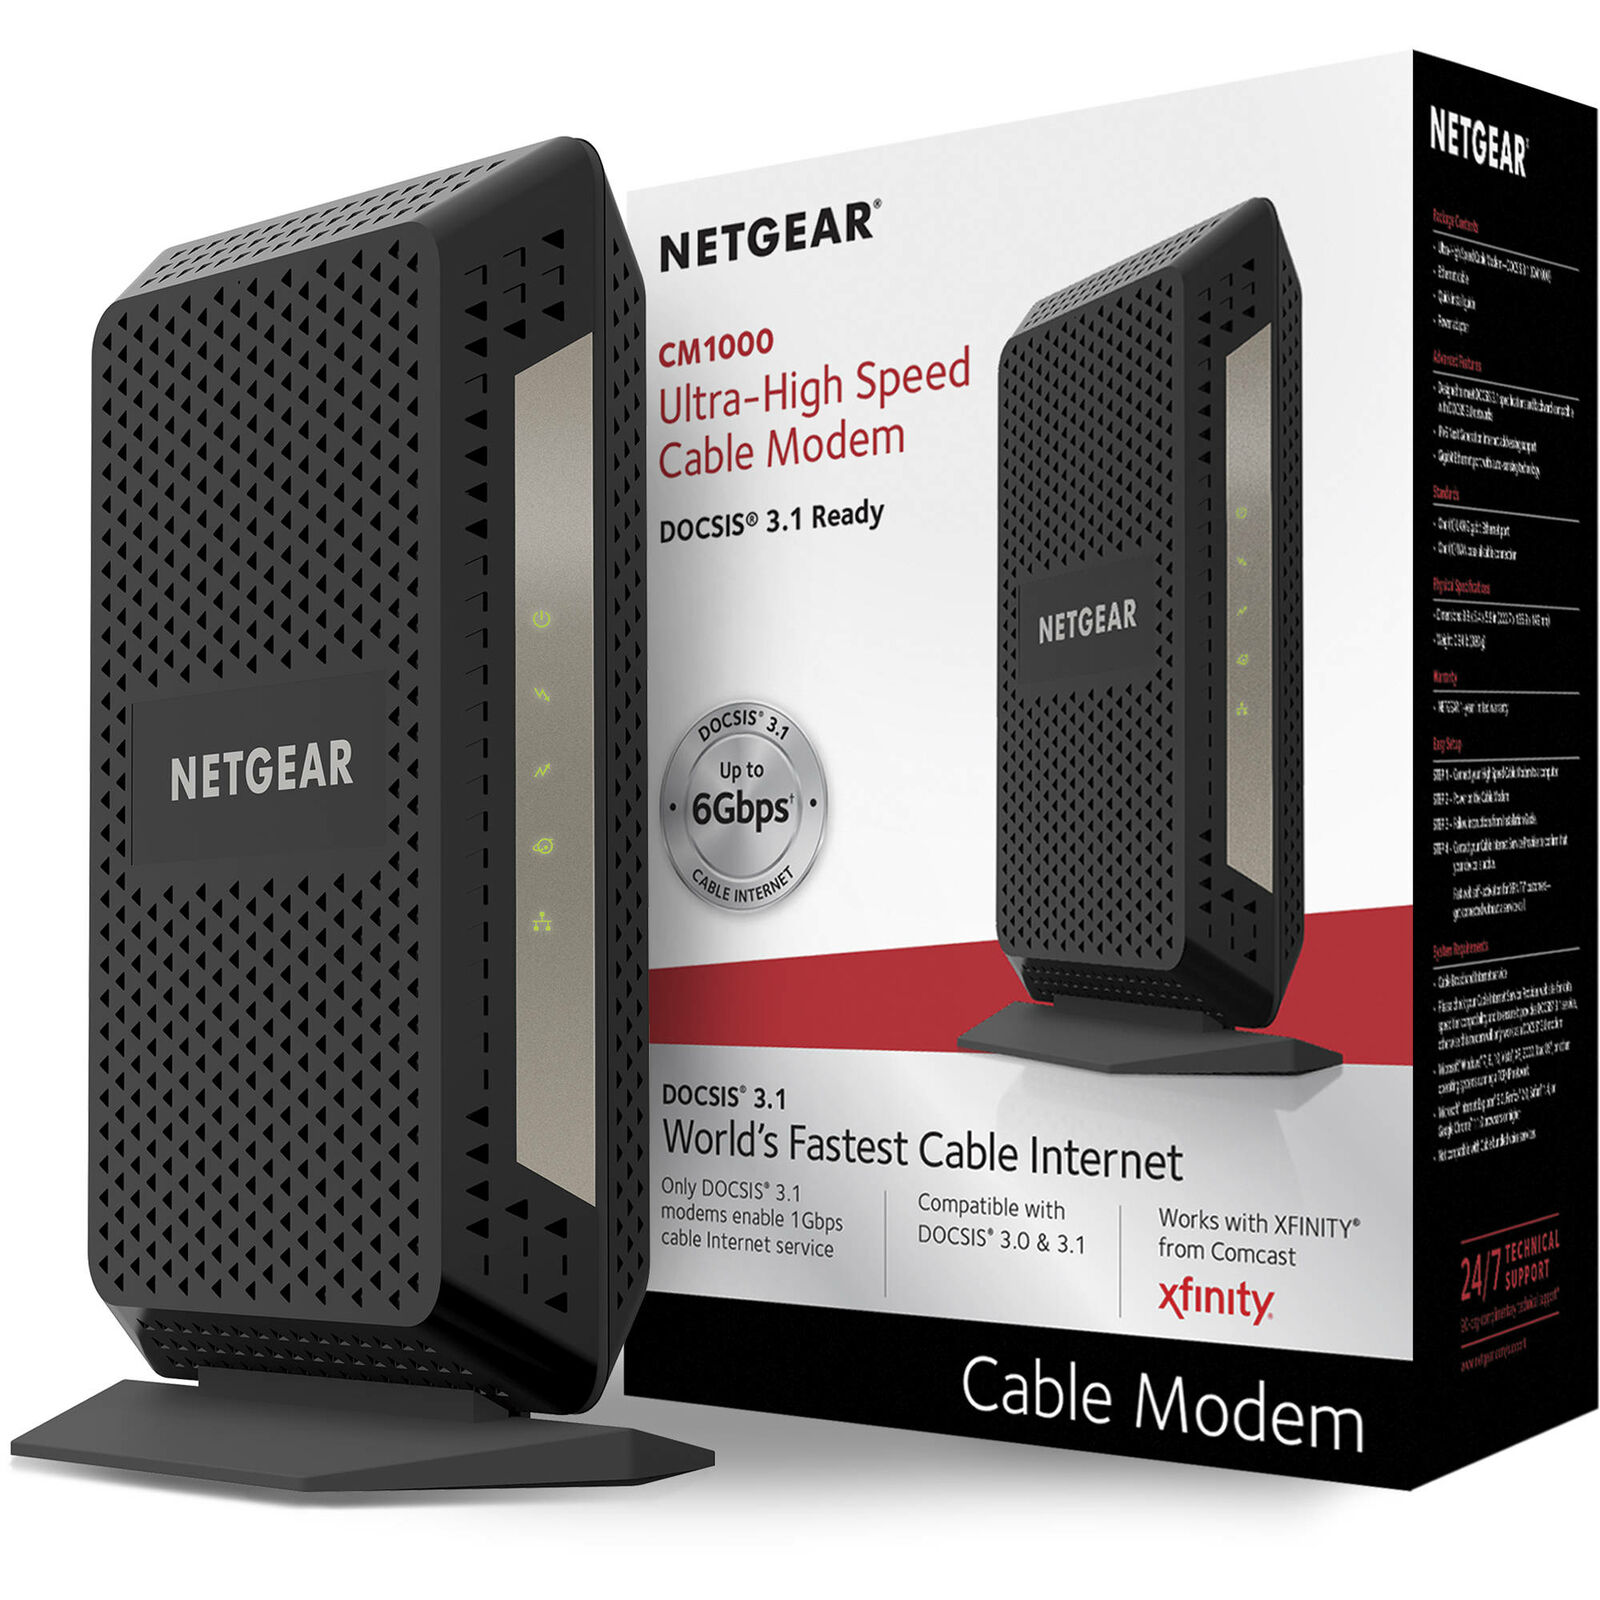 Netgear CM1000 DOCSIS 3.1 Xfinity Compatible Ultra-High Speed Cable Modem